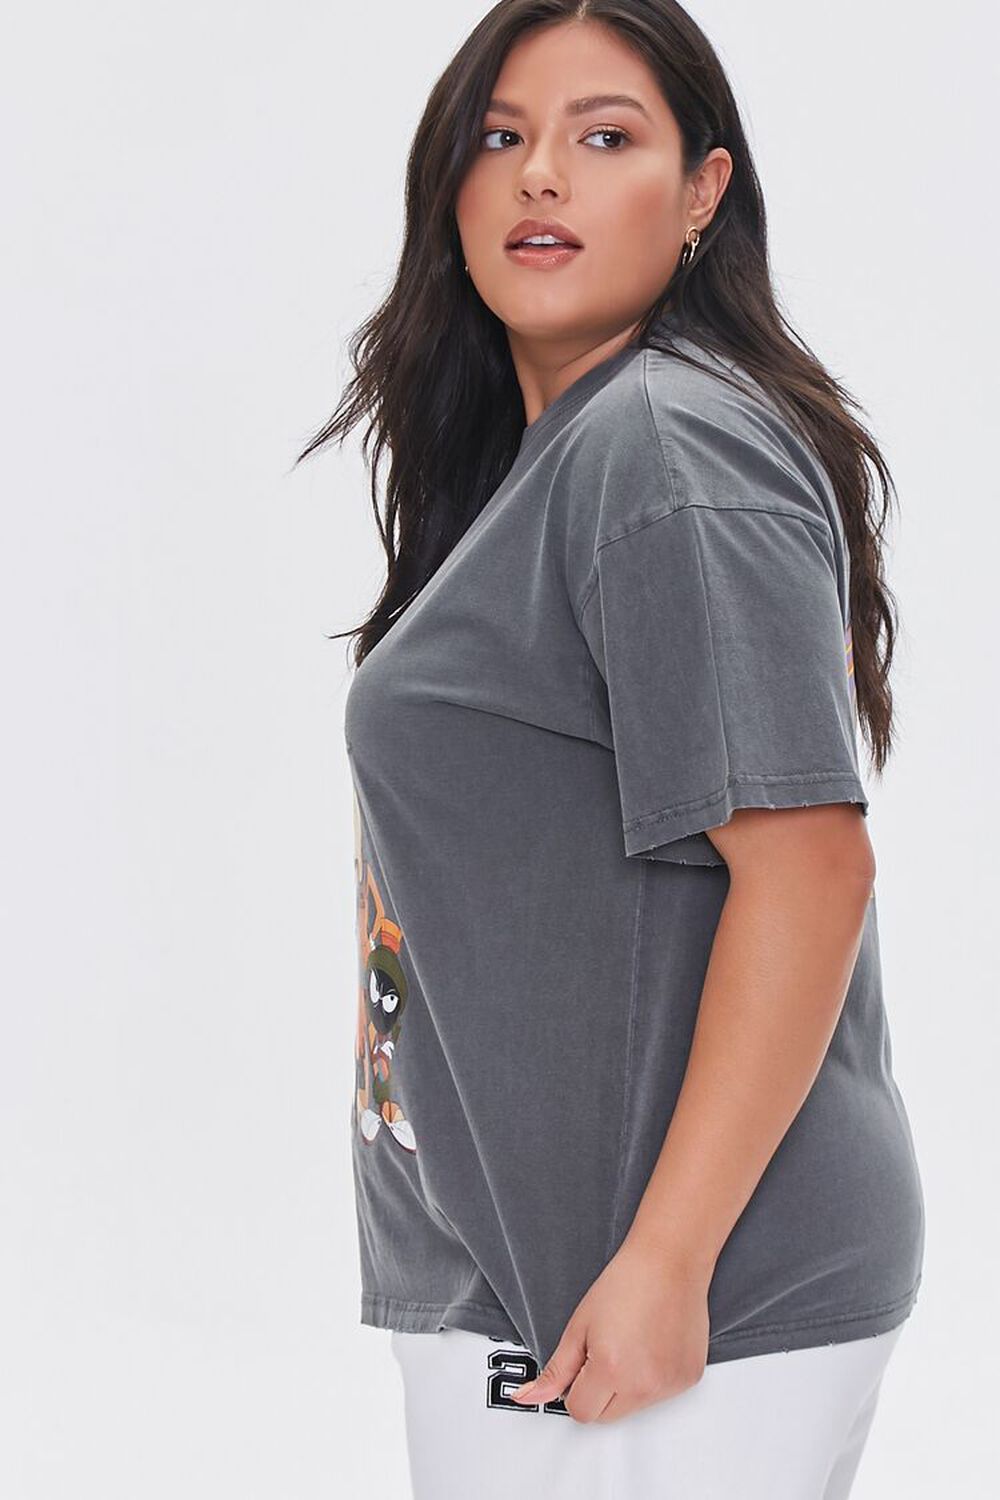 CHARCOAL/MULTI Plus Size Space Jam Graphic Tee, image 2